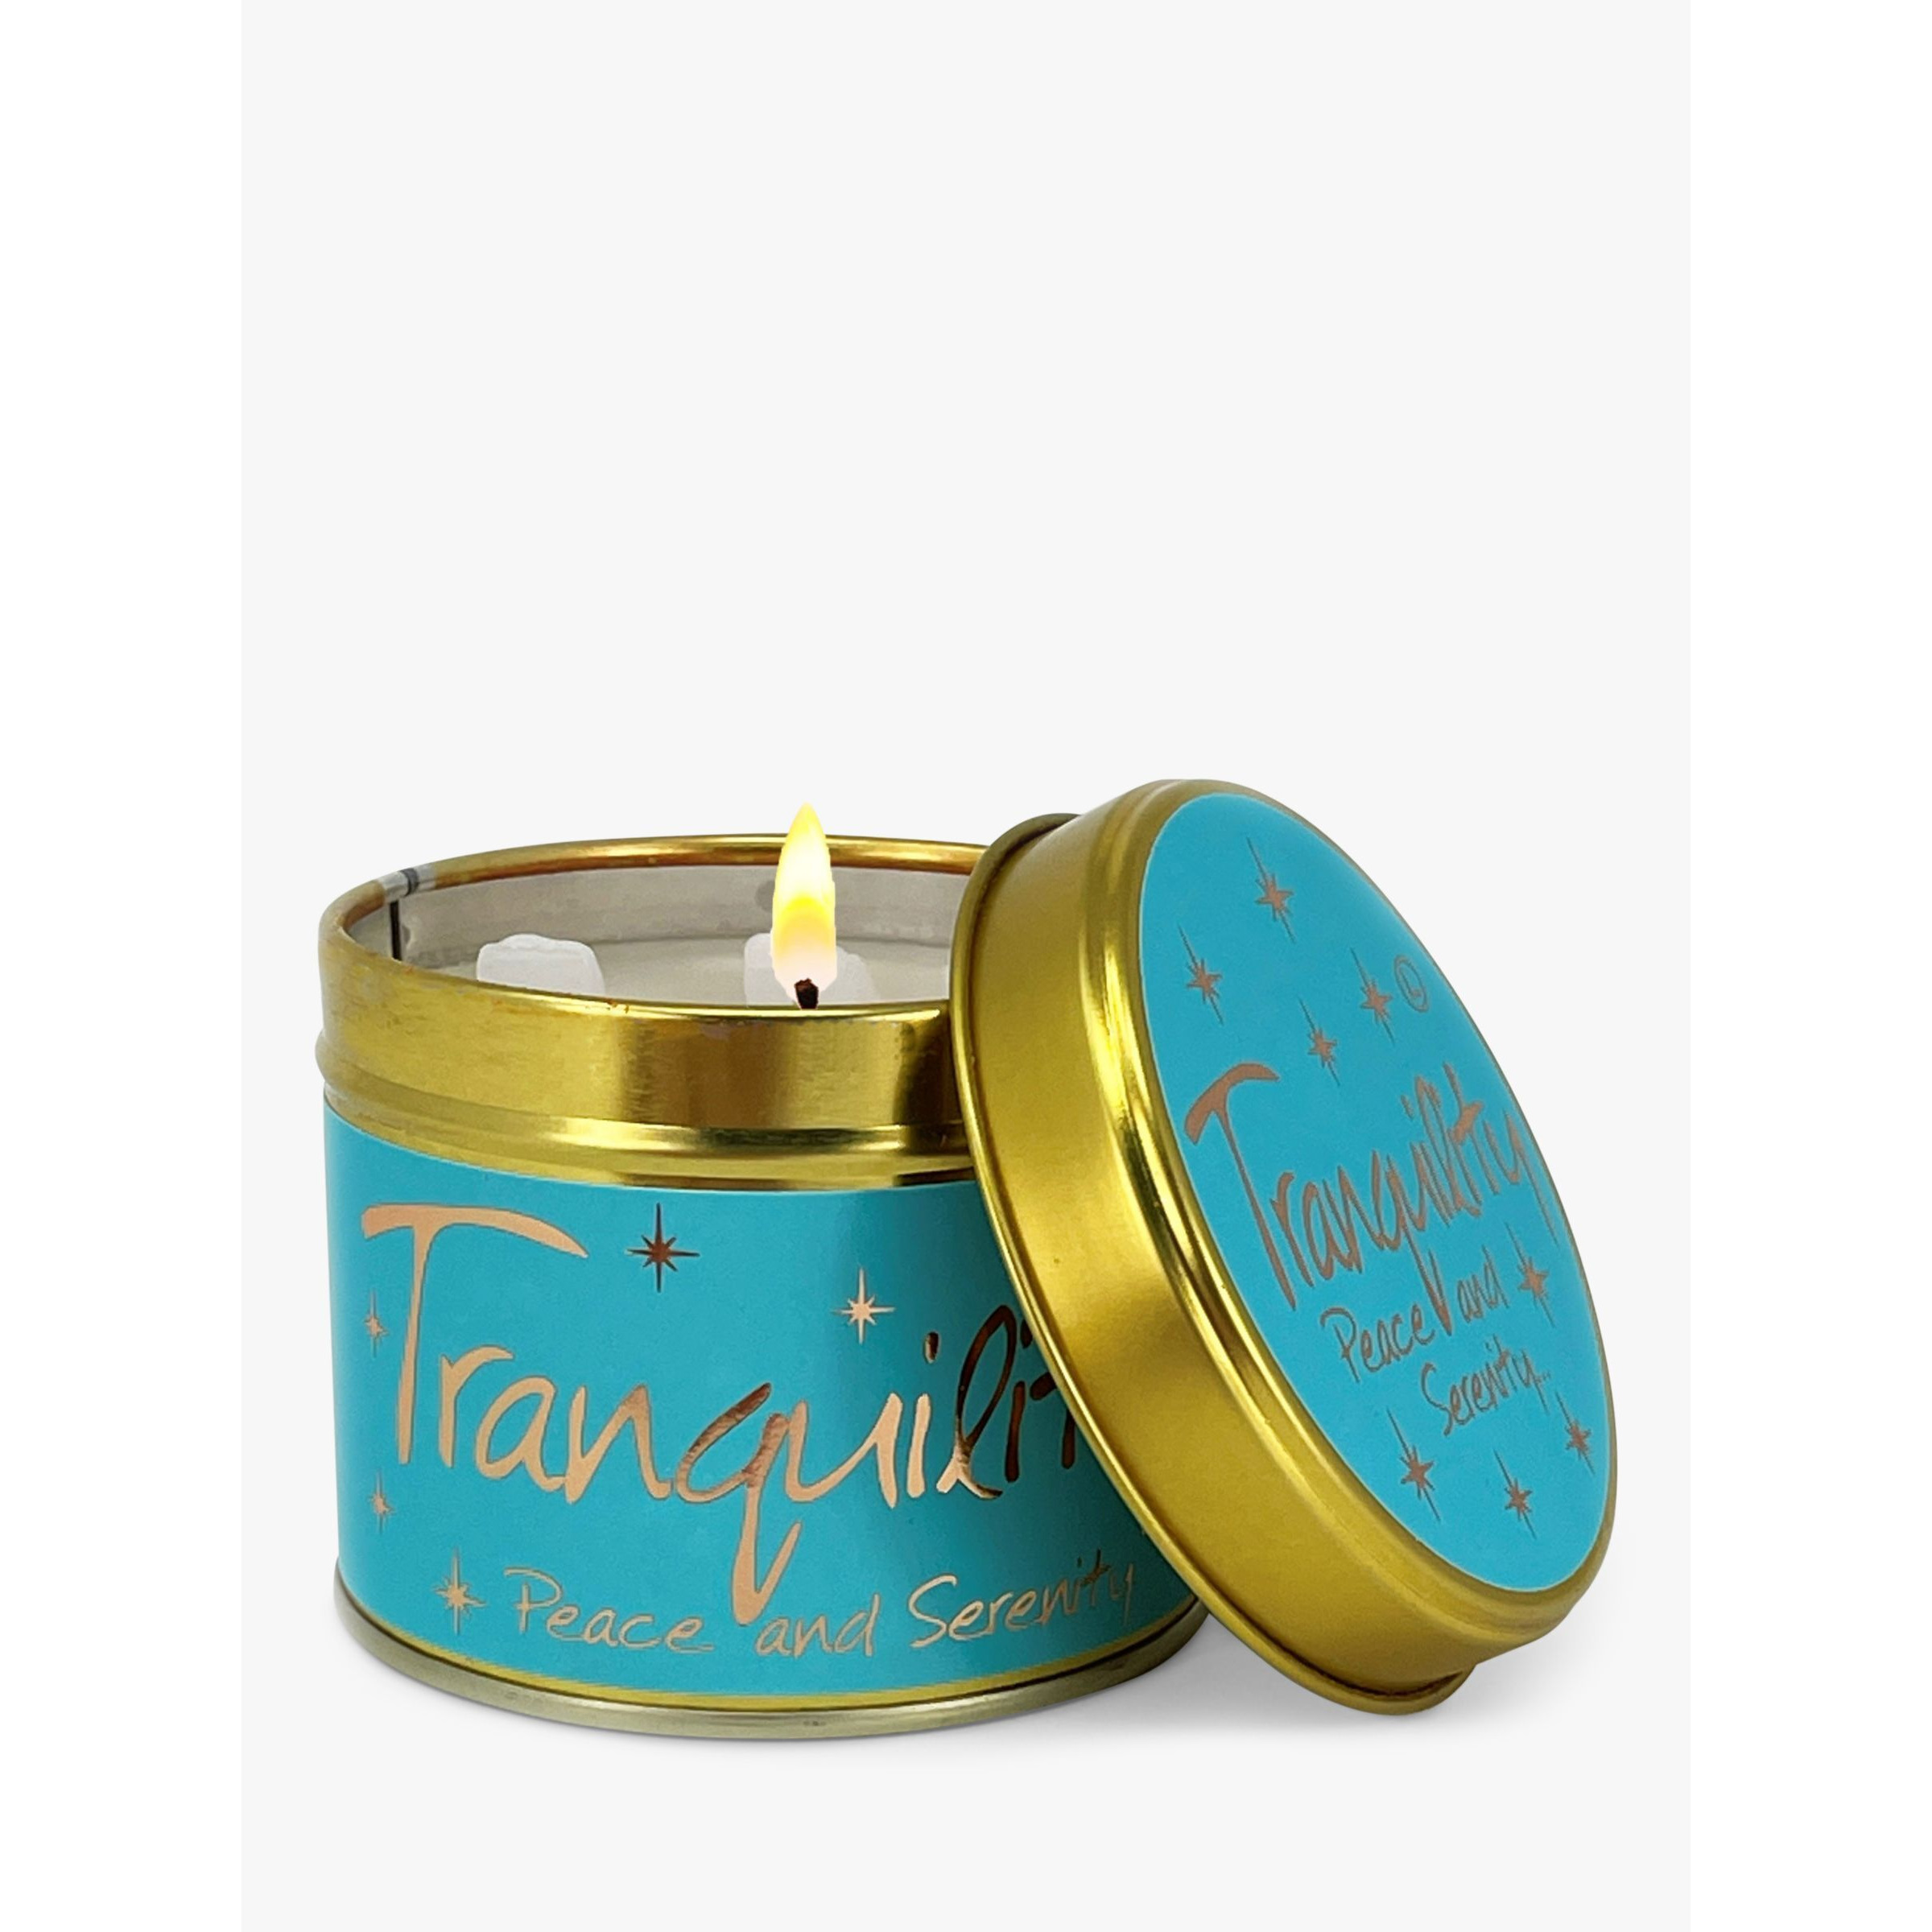 Lily-flame Tranquility Tin Scented Candle, 230g - image 1